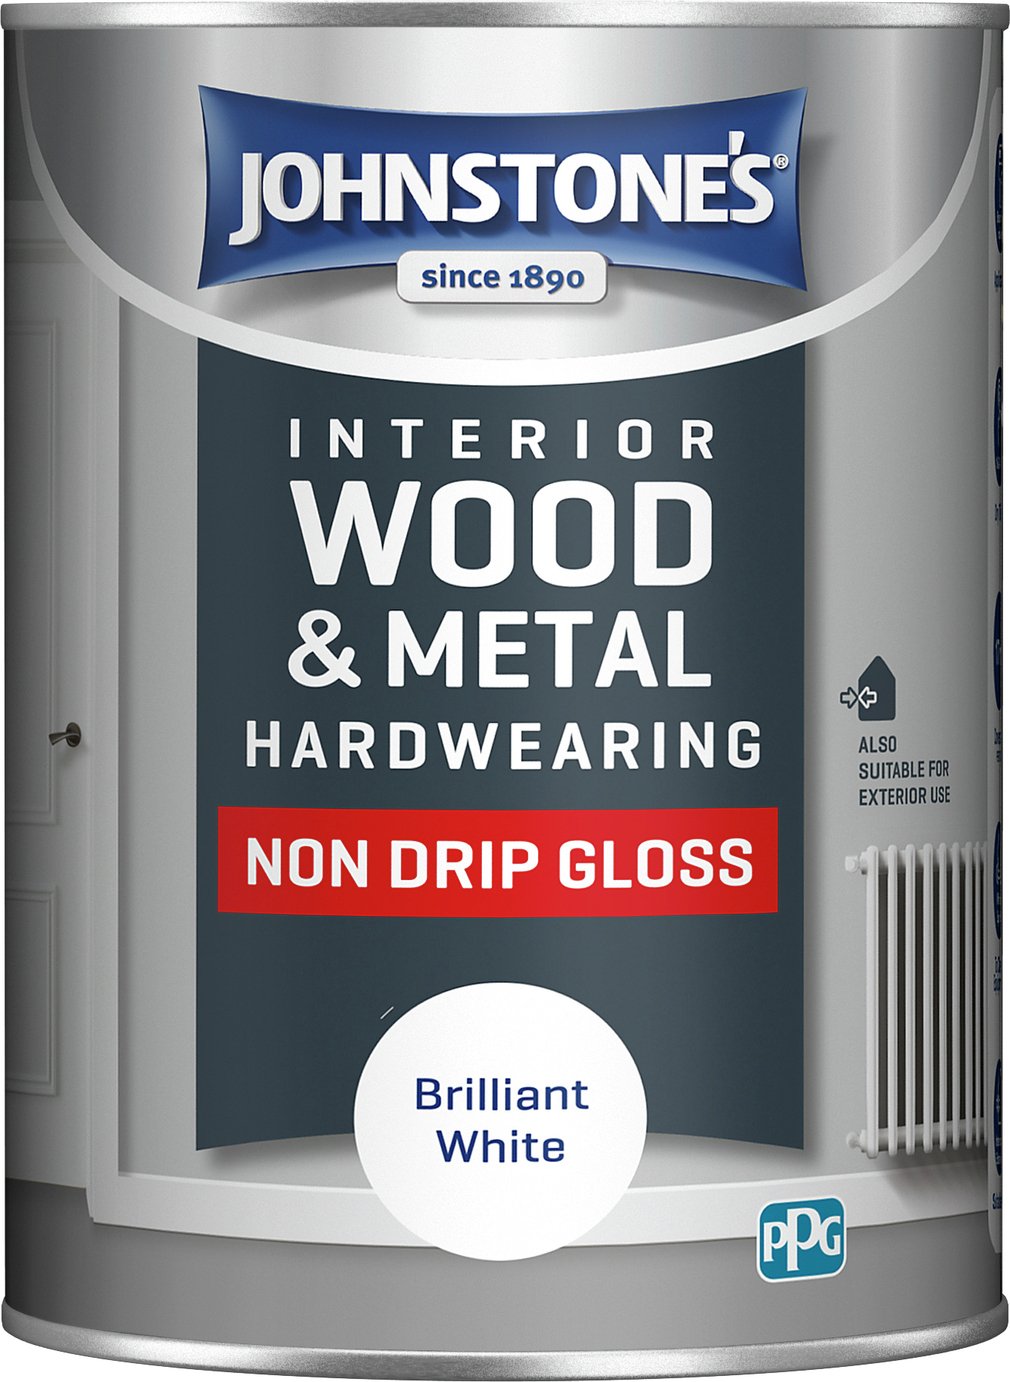 Johnstone's Non Drip Gloss Paint 1.25L Review